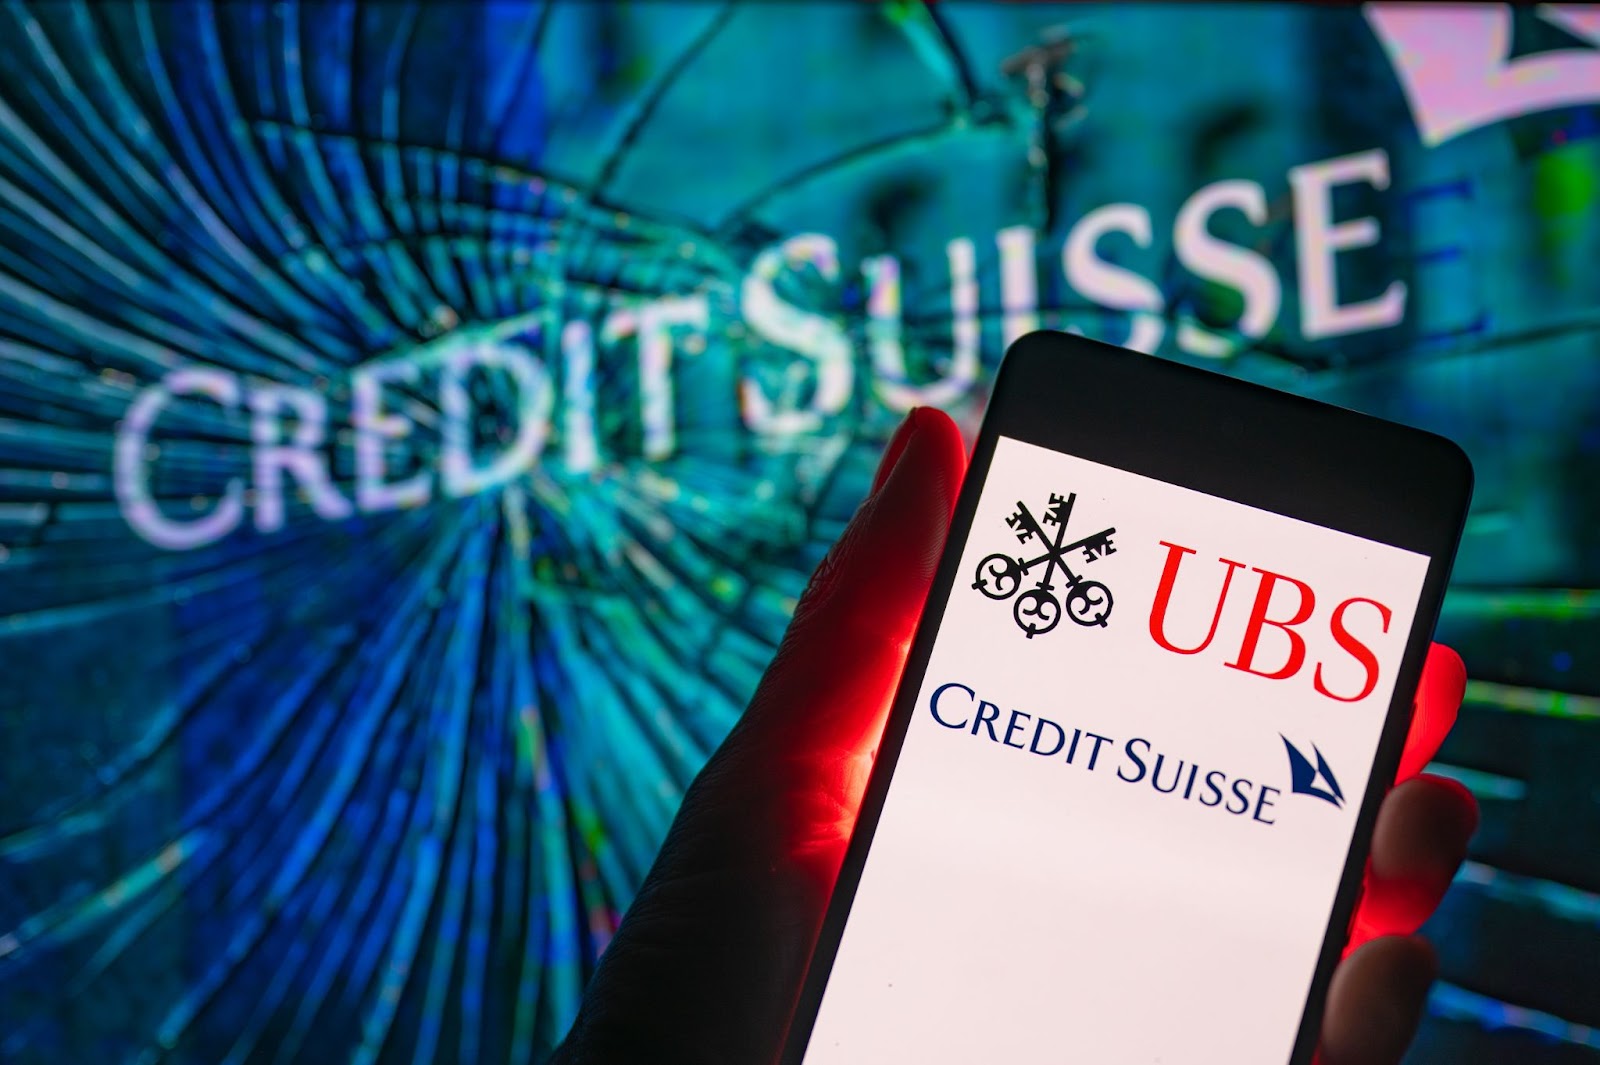 Credit Suisse is a Swiss banking company founded in 1856